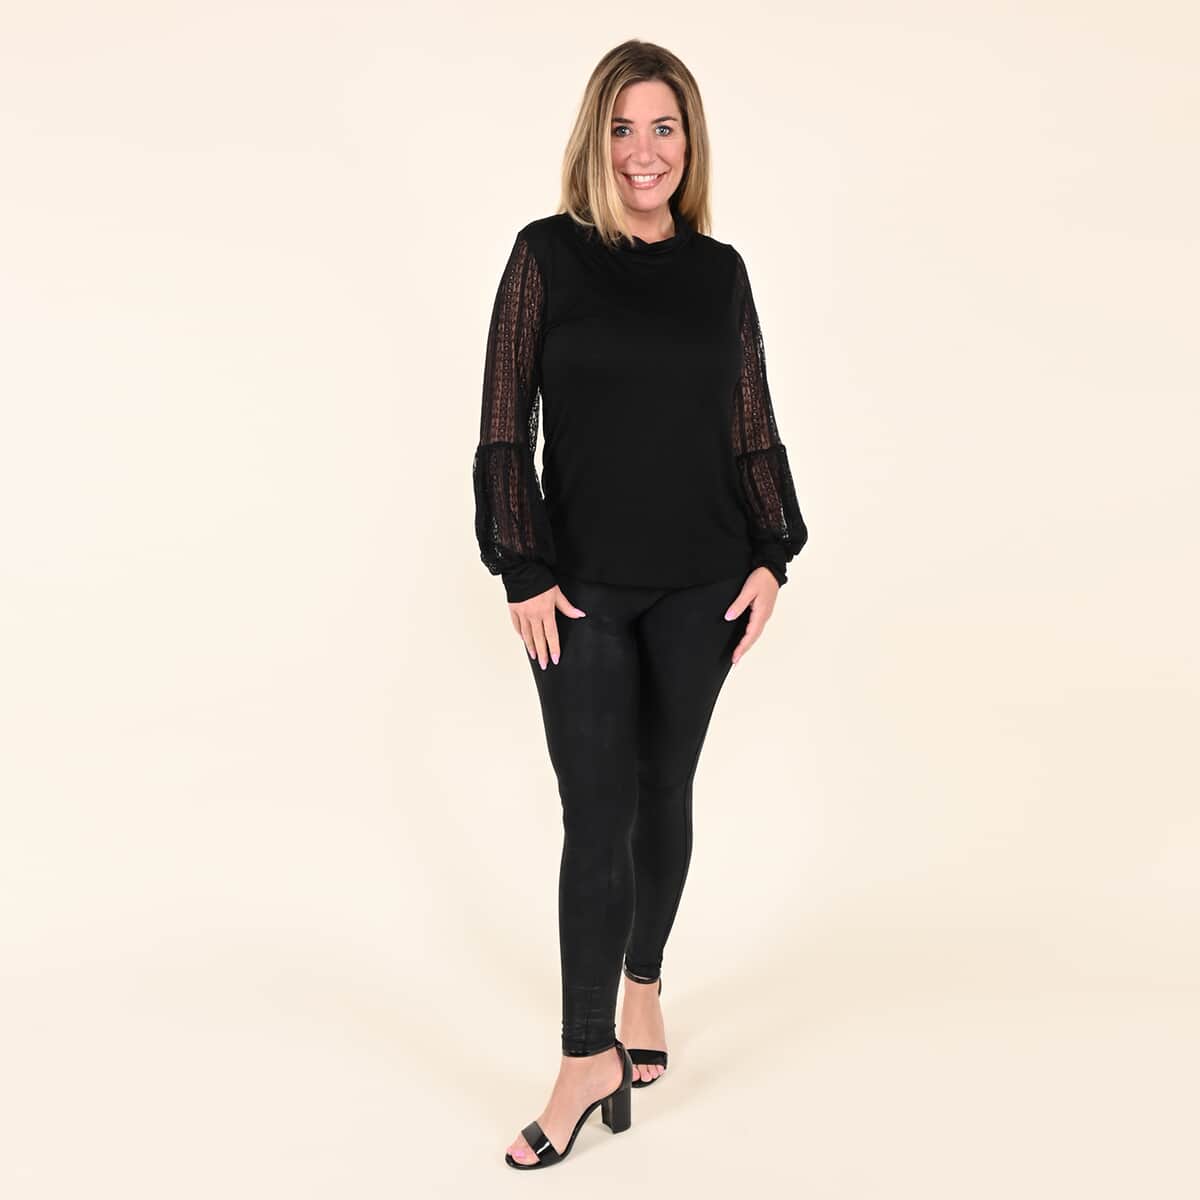 Tamsy Black Lace Long Sleeve Blouse - 1X image number 0